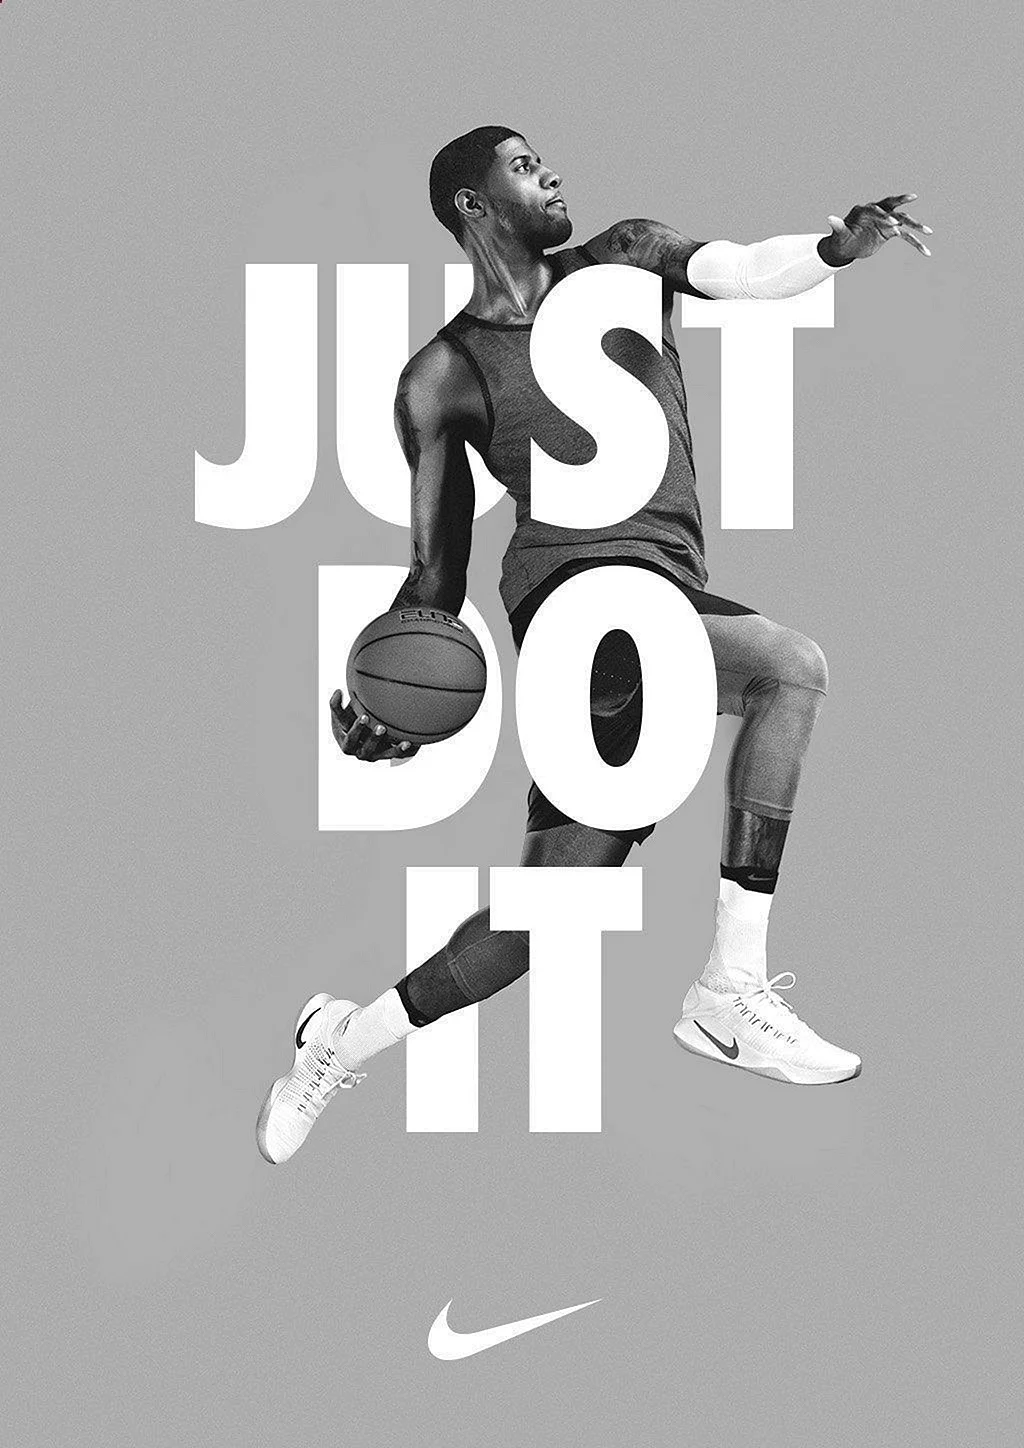 Nike Poster Design Wallpaper For iPhone